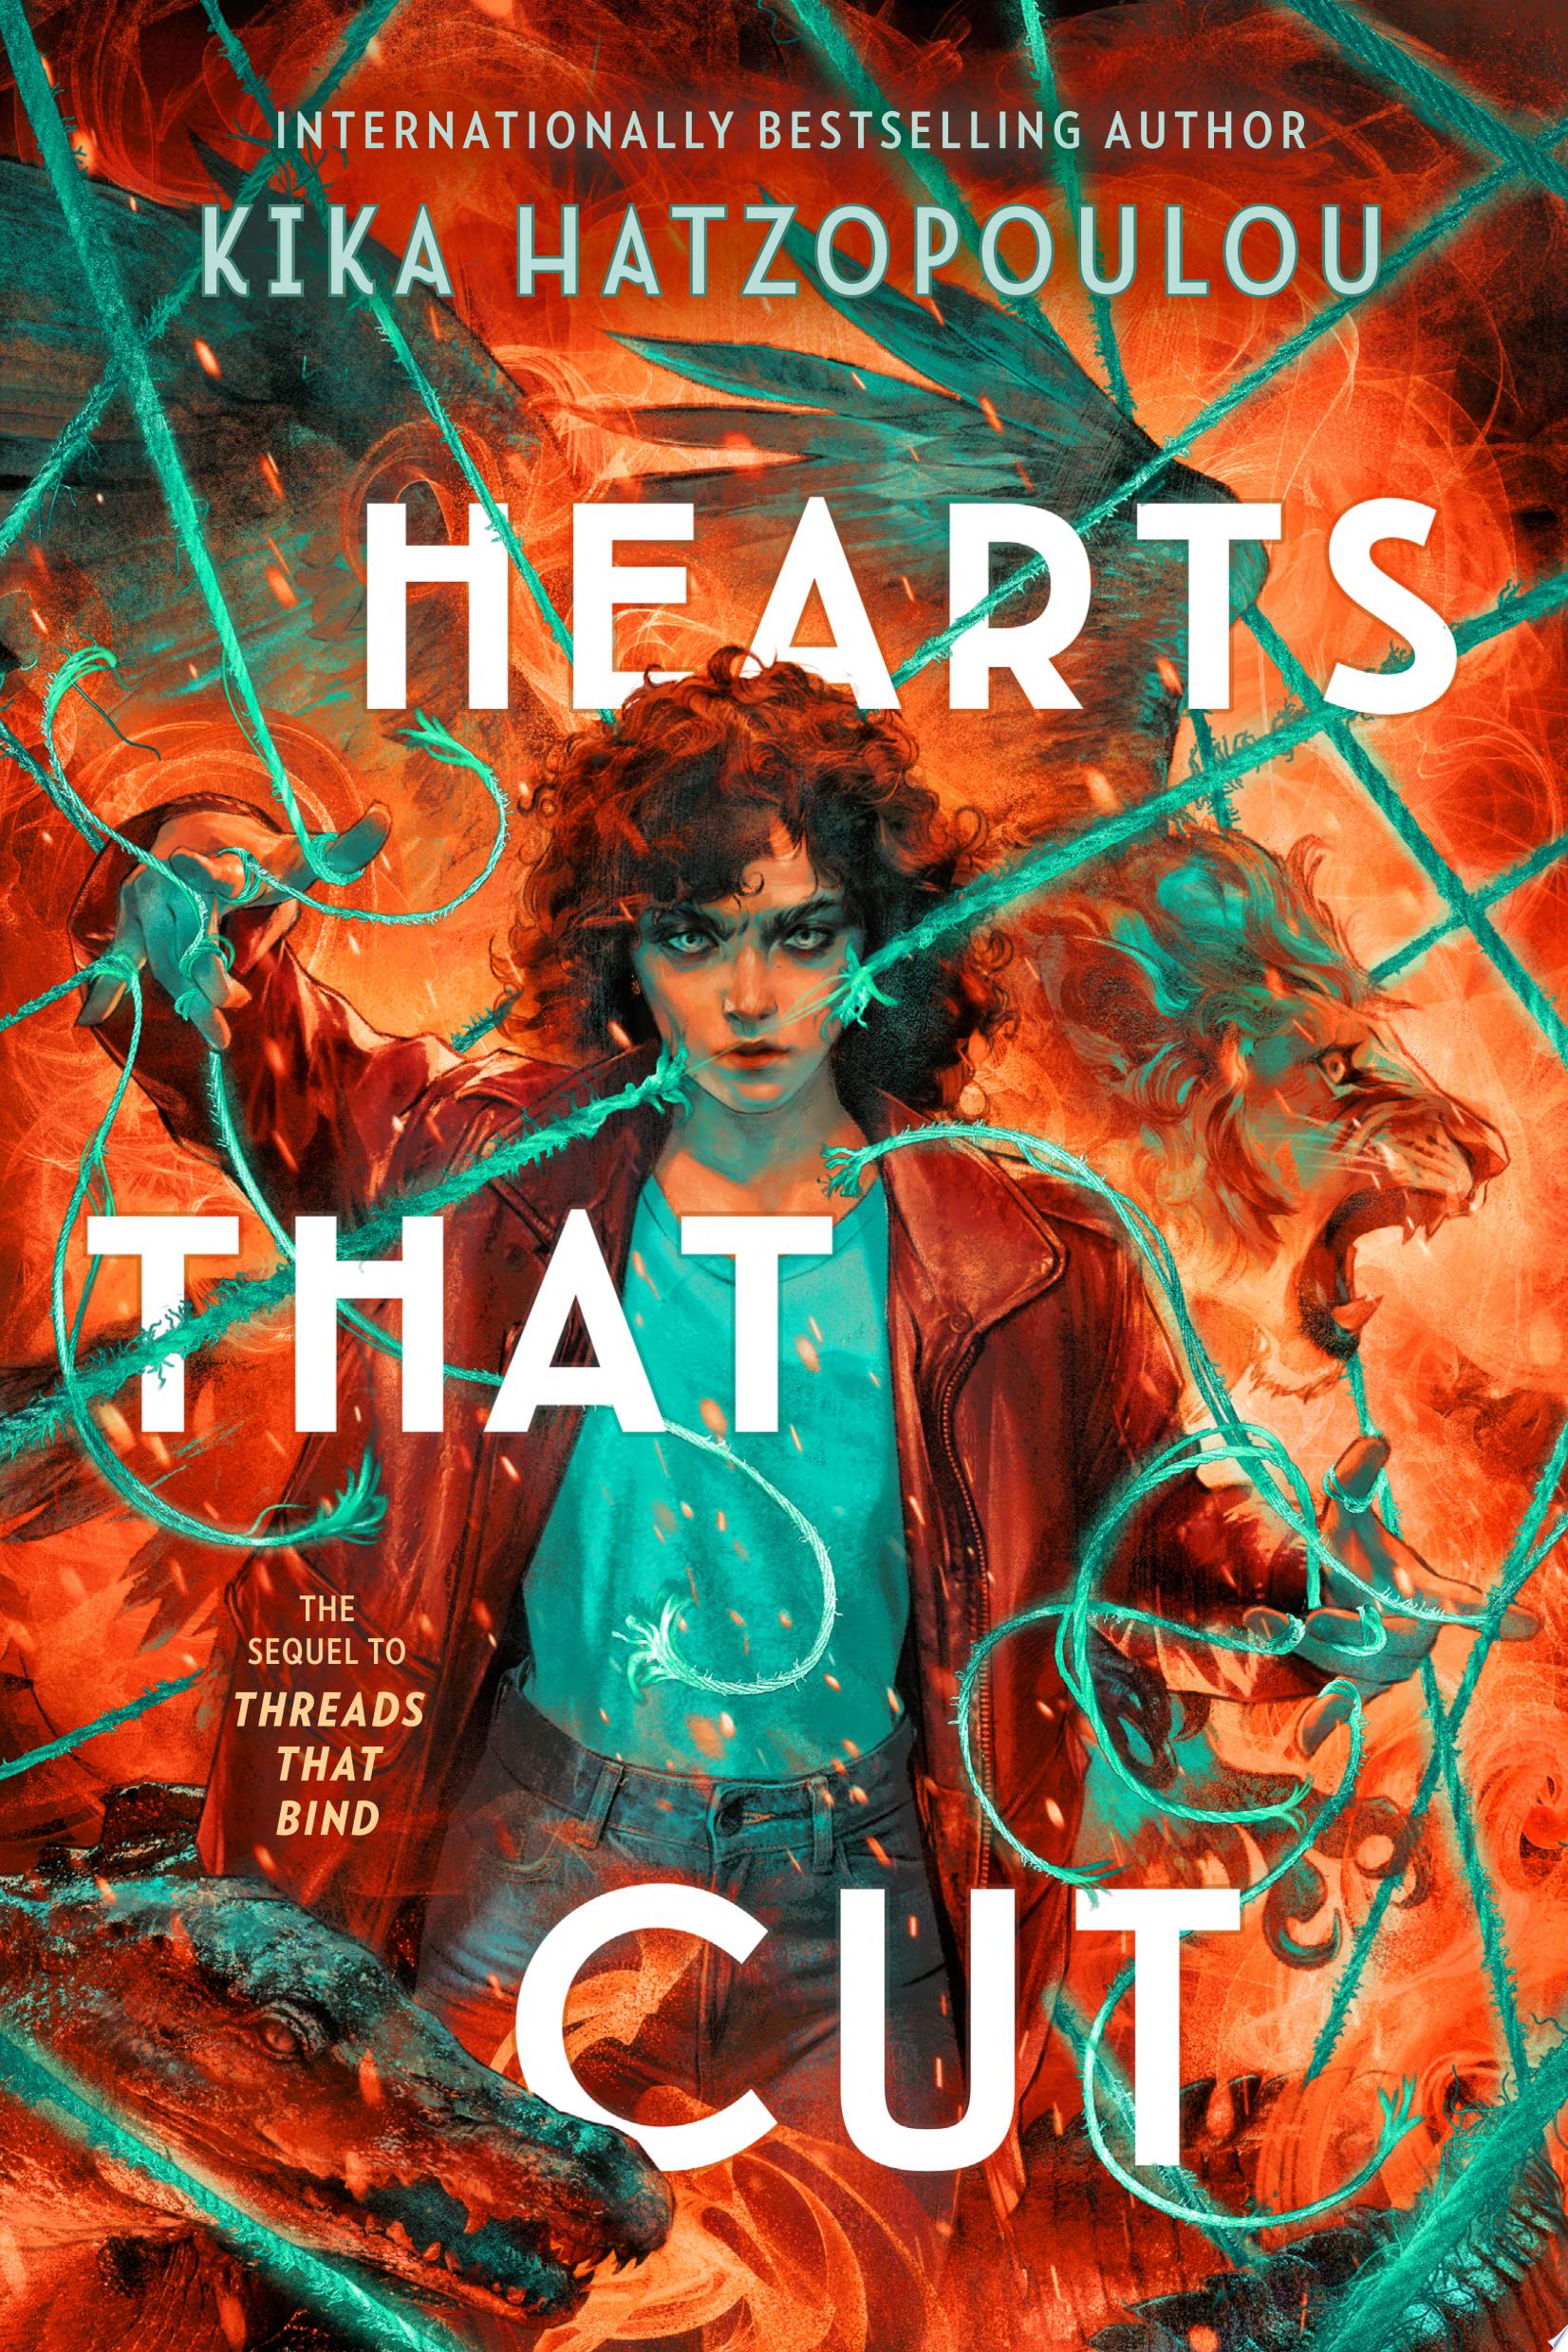 Image for "Hearts That Cut"